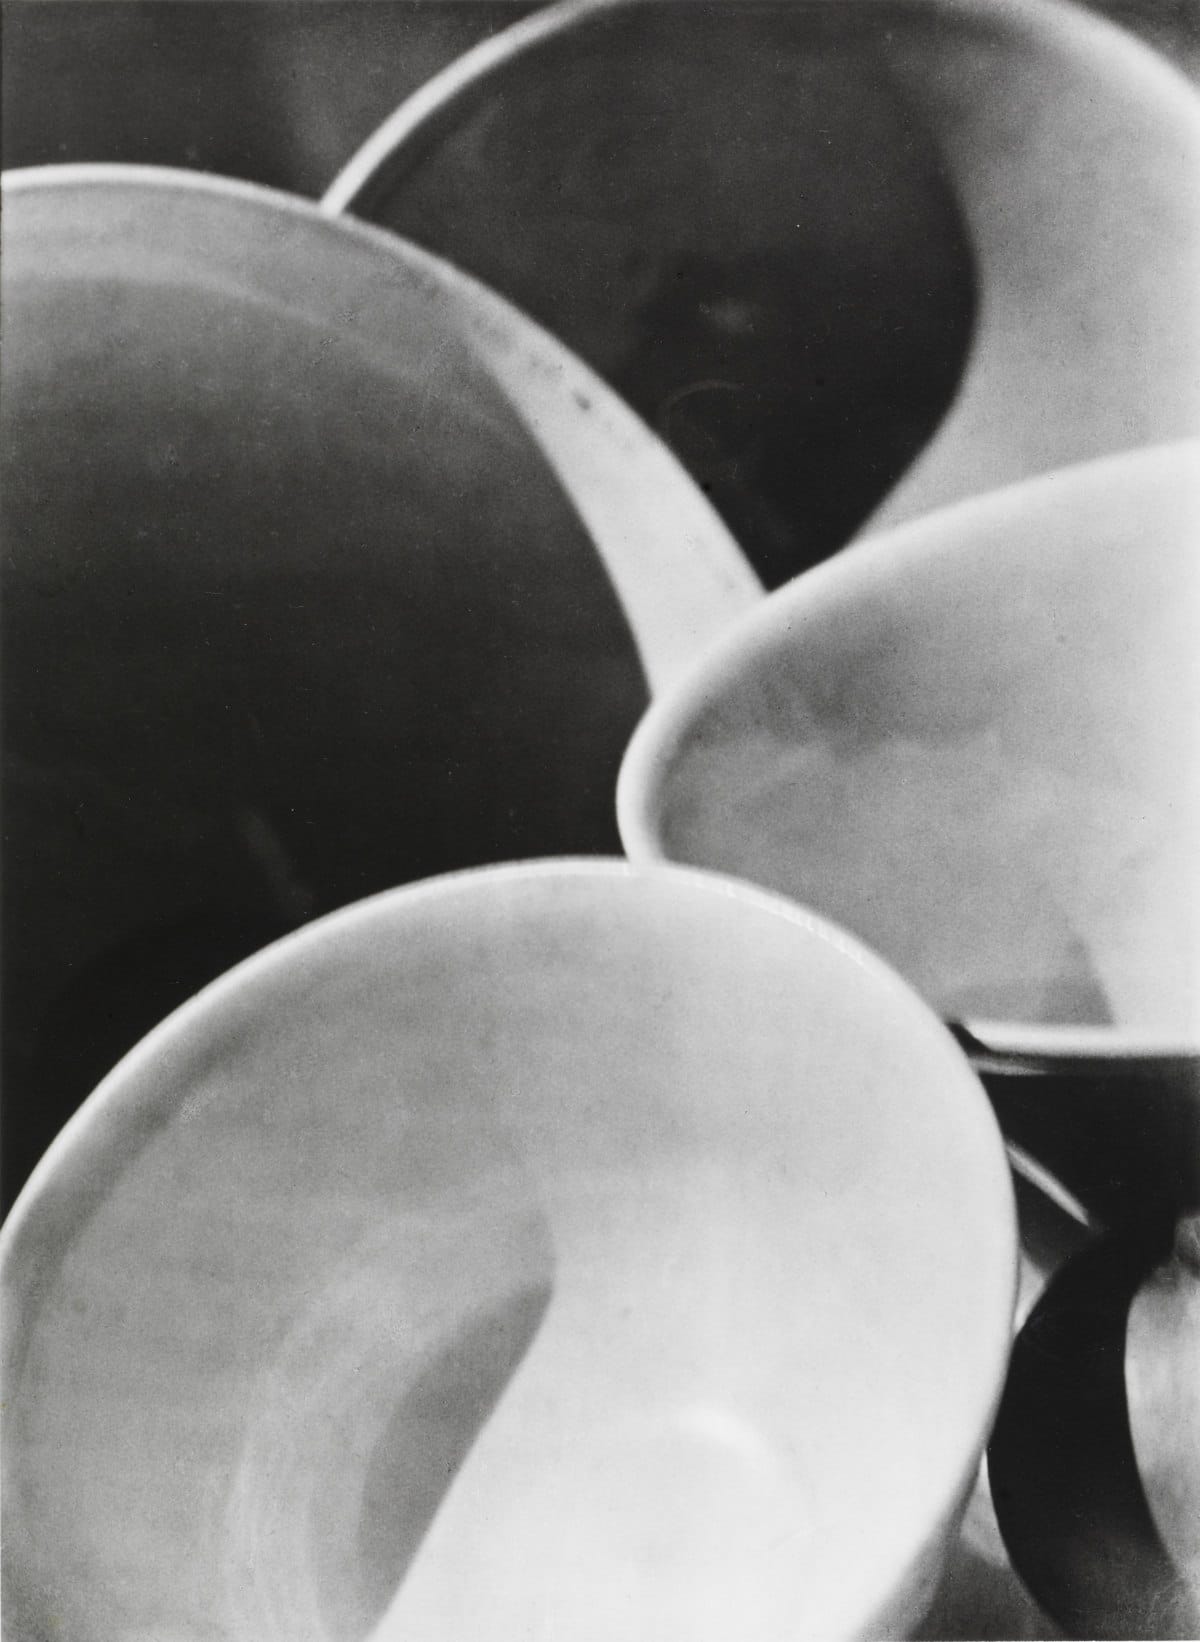 Abstraction, Bowls, Twin Lakes, Connecticut [Abstracción, tazones, Twin Lakes, Connecticut] © Aperture Foundation, Inc., Paul Strand Archive © COLECCIONES Fundación MAPFRE